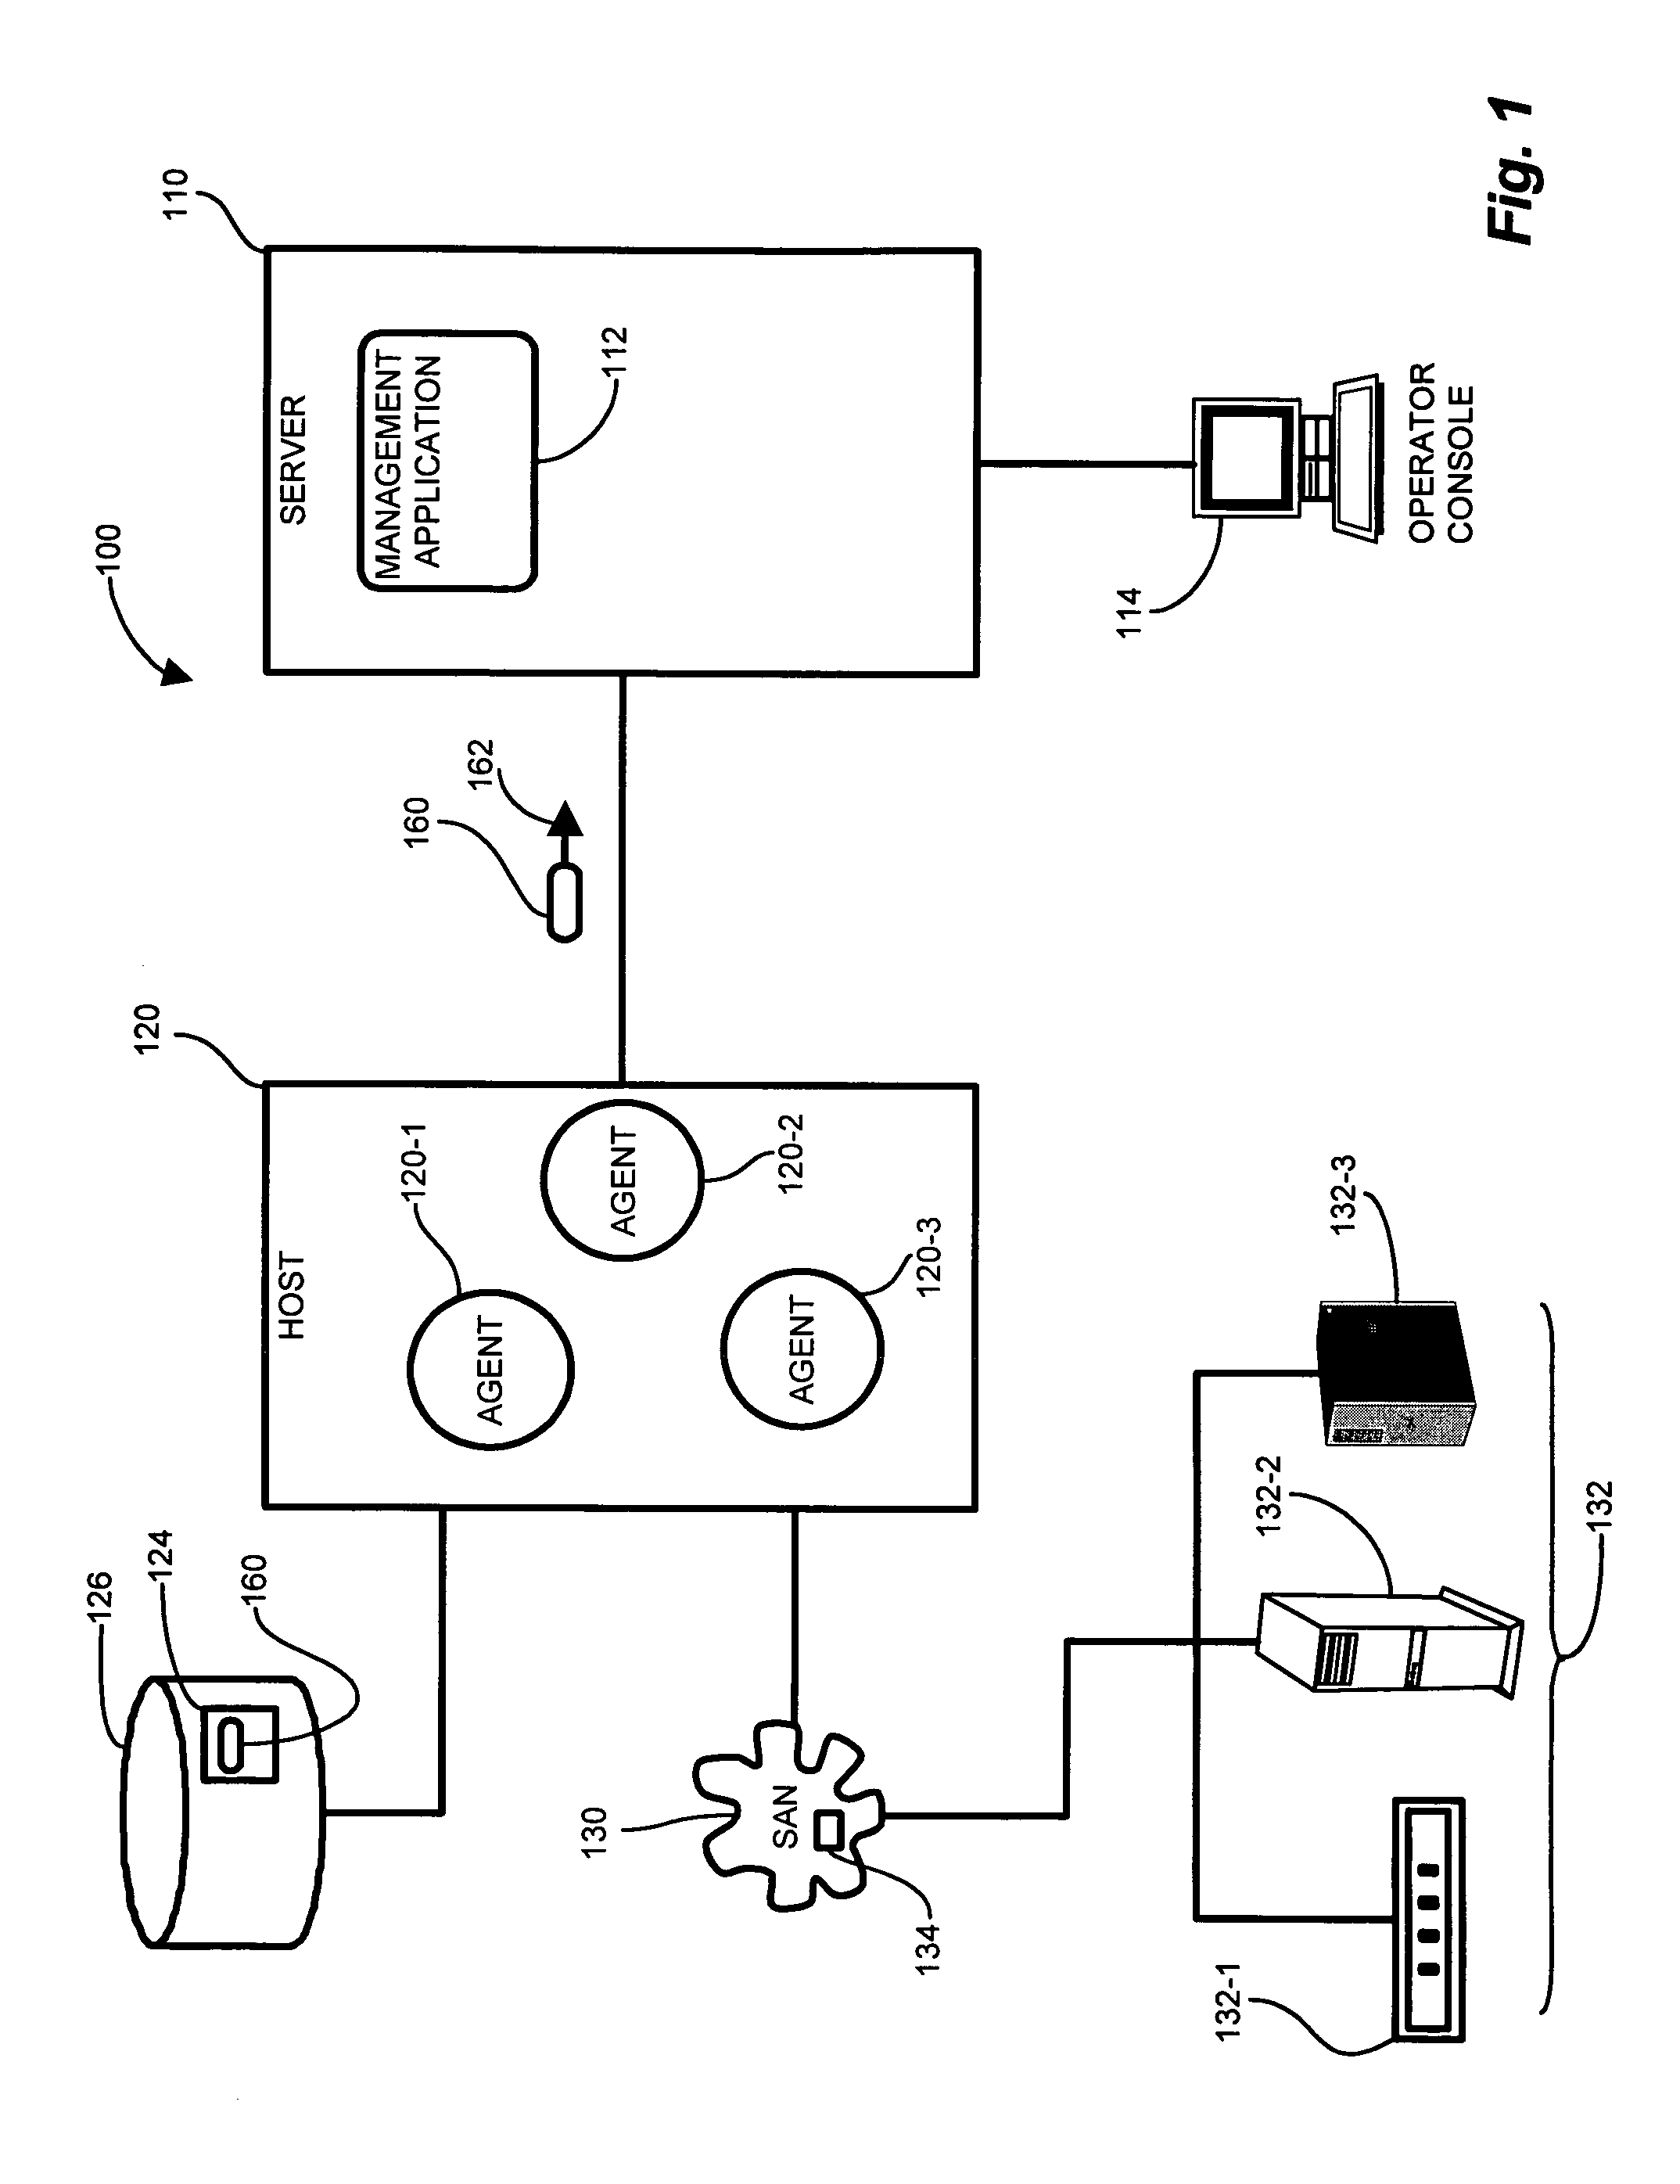 System and methods for host naming in a managed information environment